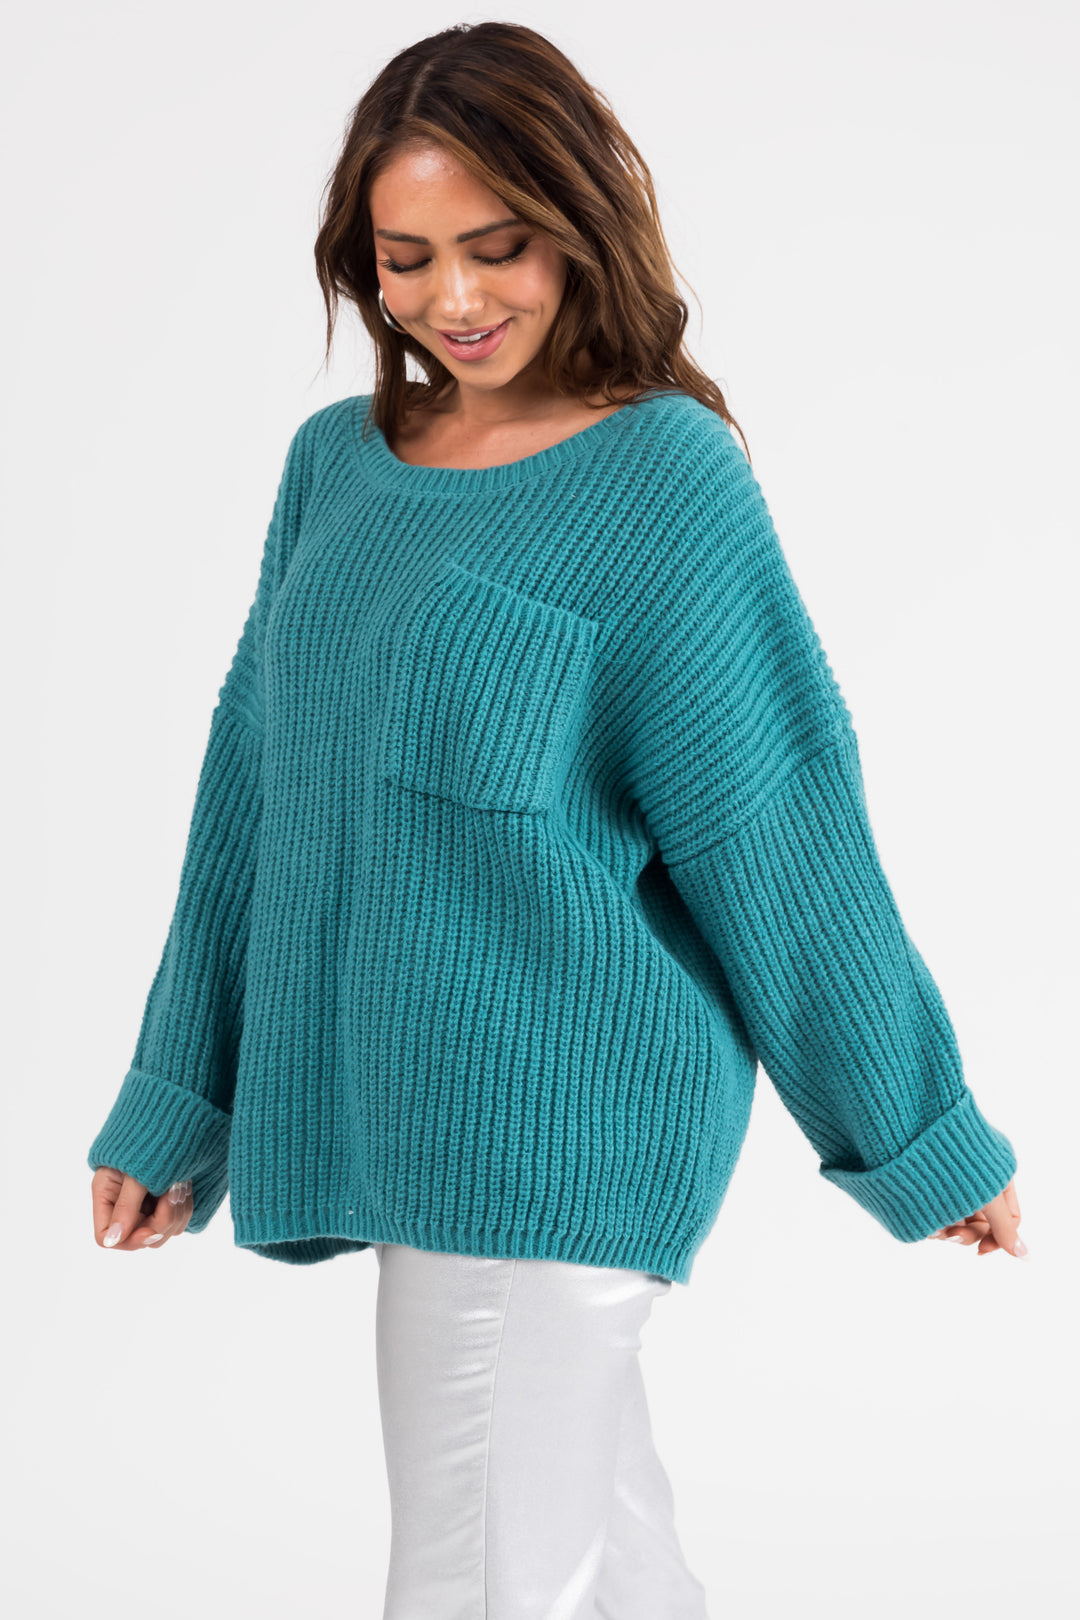 Teal Oversized Chest Pocket Cozy Sweater & Lime Lush